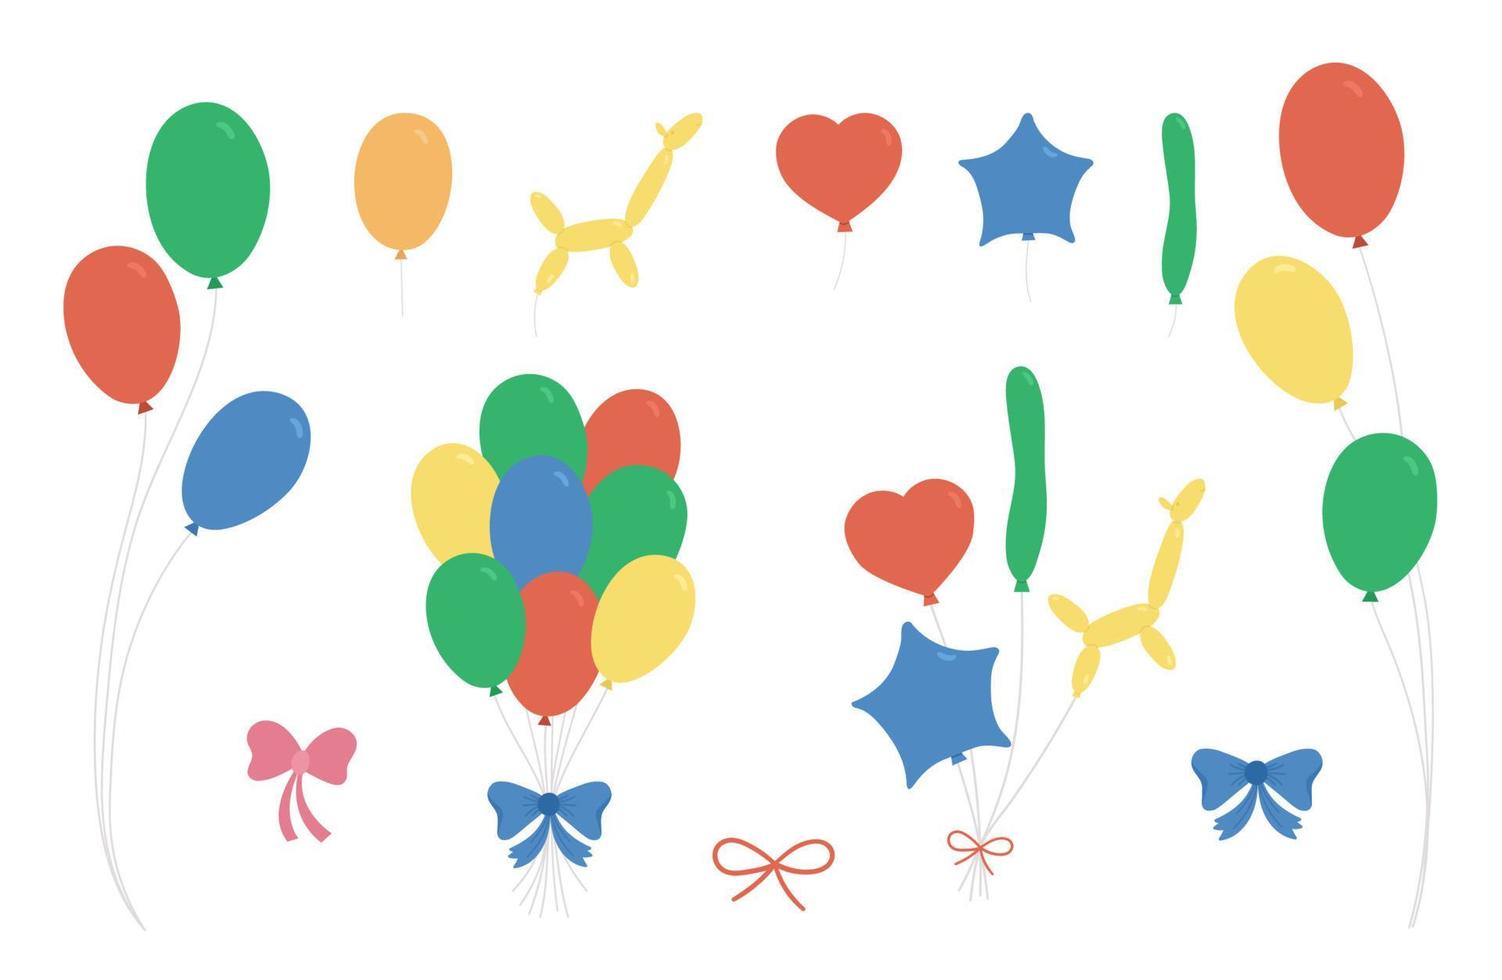 Vector cute balloons set. Funny birthday presents collection for card, poster, print design. Bright holiday illustration for kids. Pack of cheerful celebration icons isolated on white background.